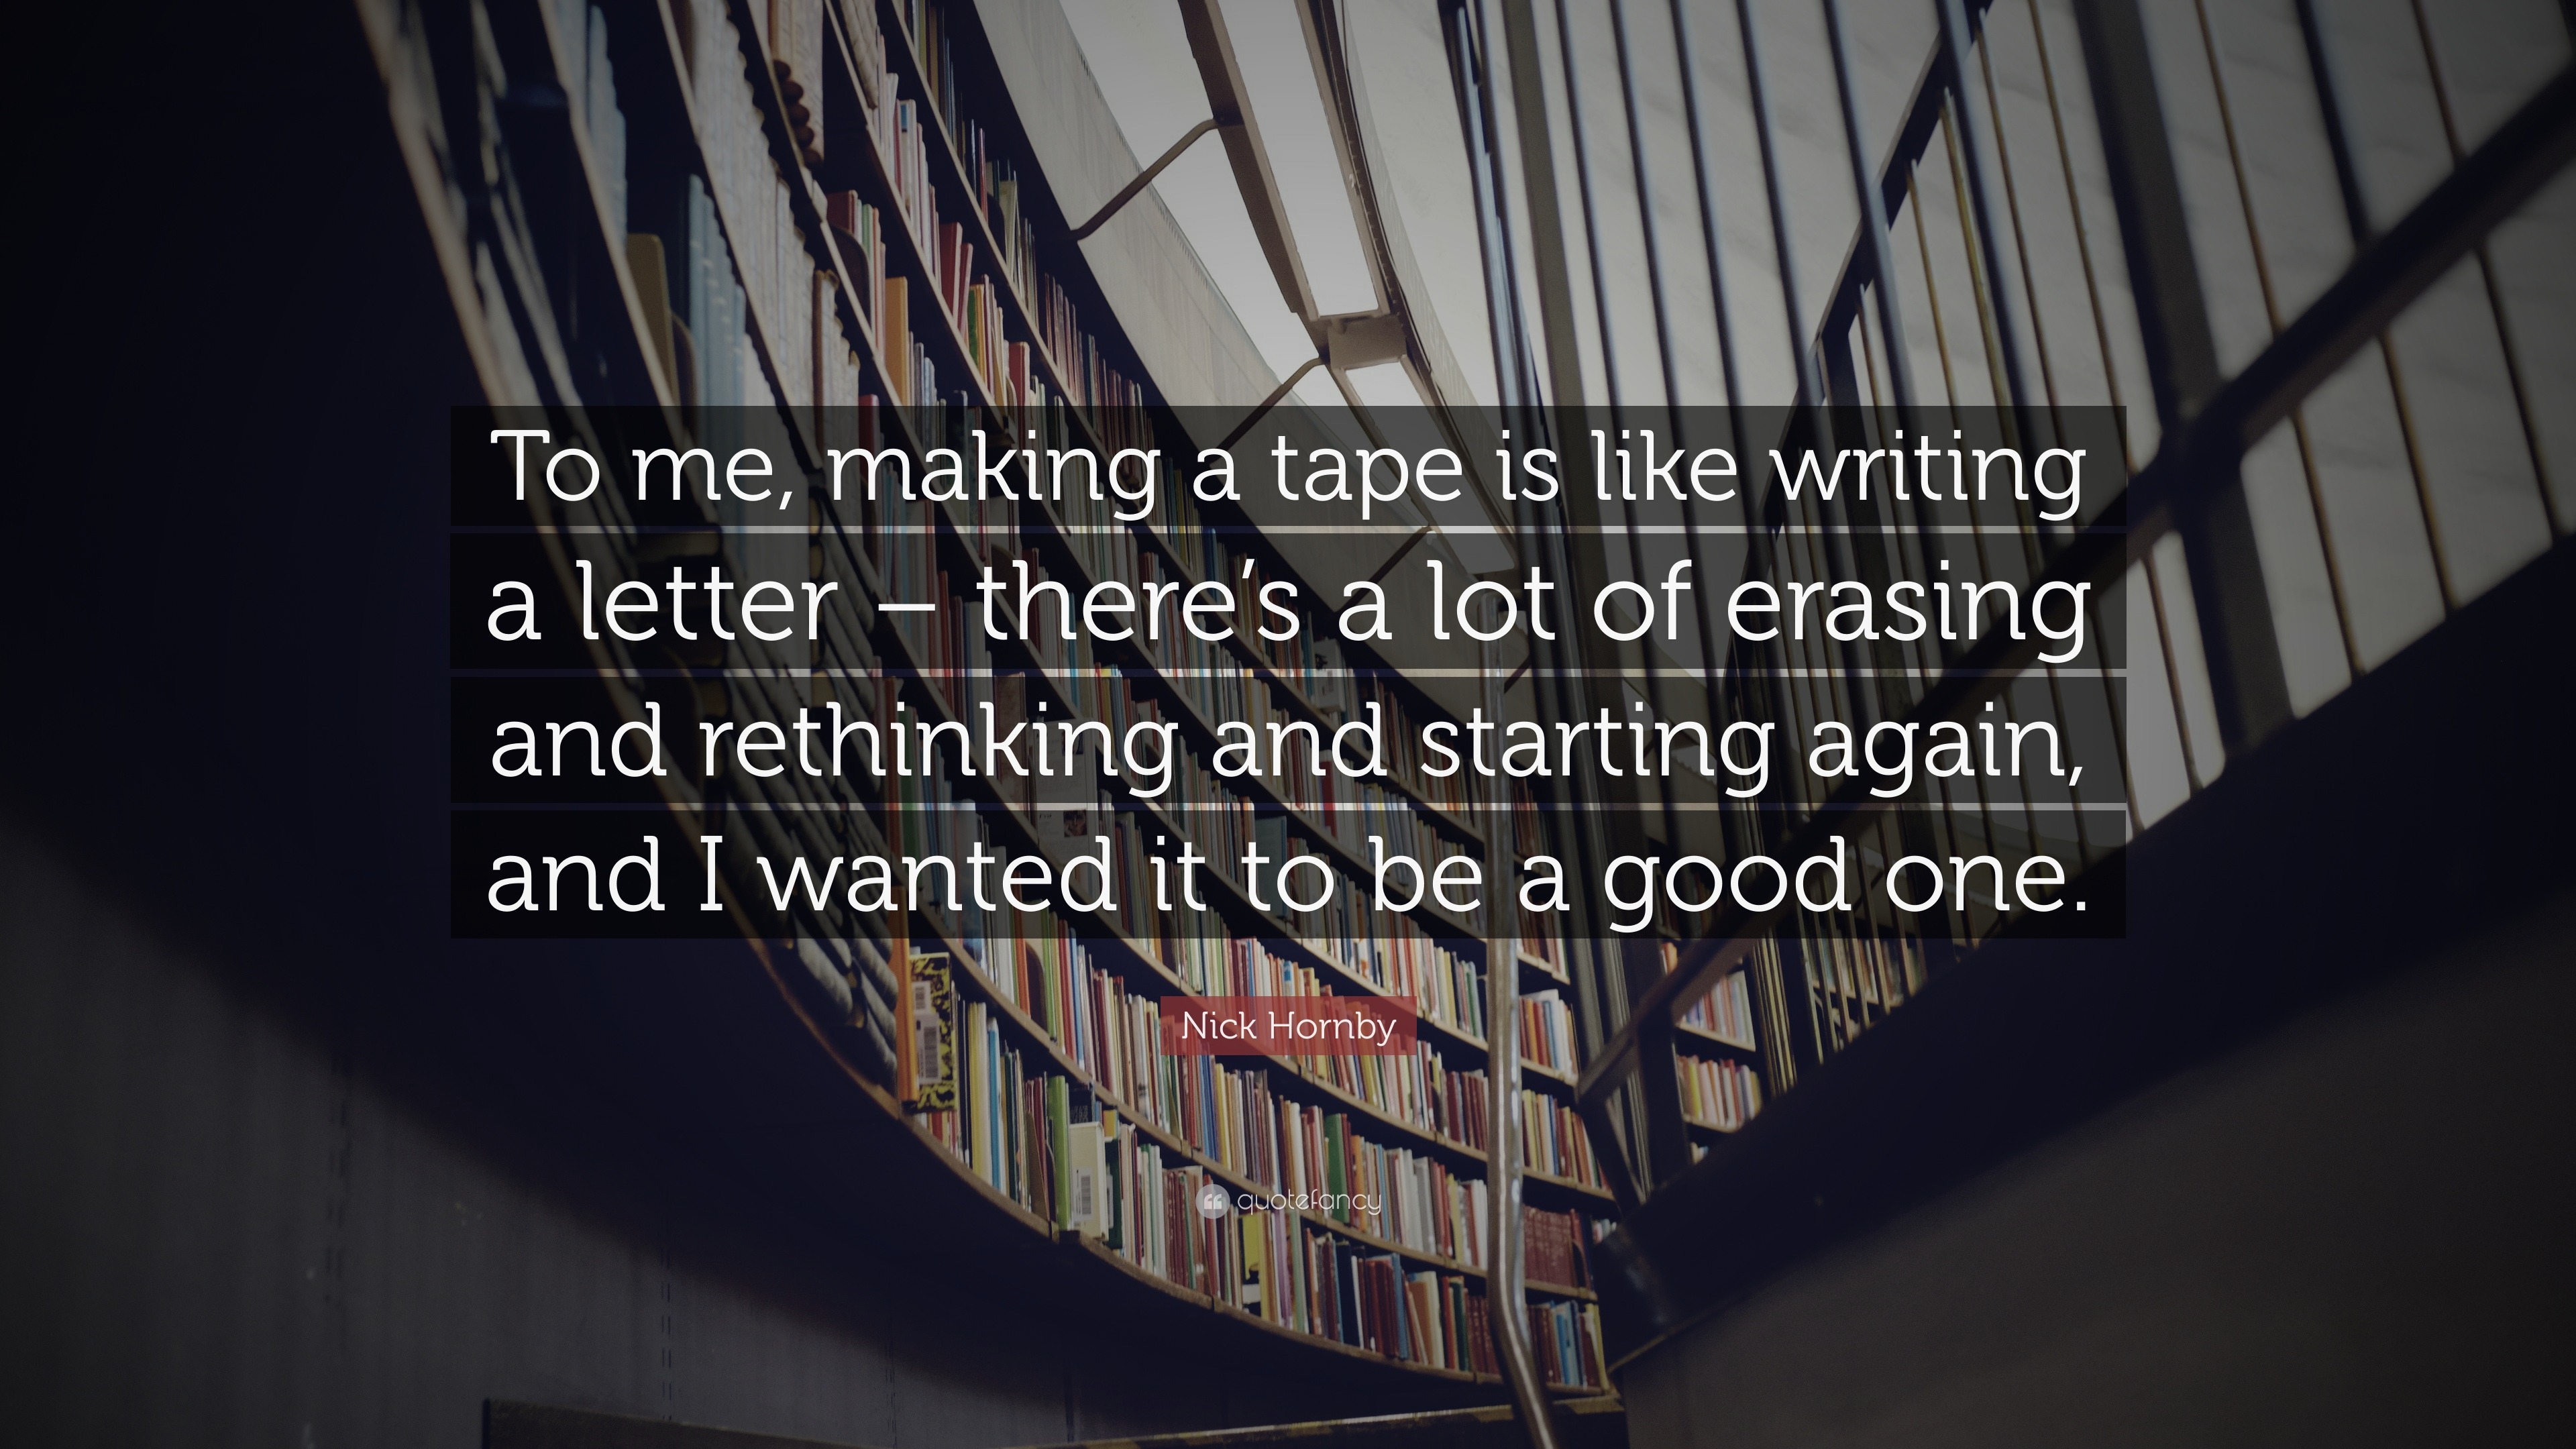 Nick Hornby Quote: “To me, making a tape is like writing a letter – there's  a lot of erasing and rethinking and starting again, and I wanted”